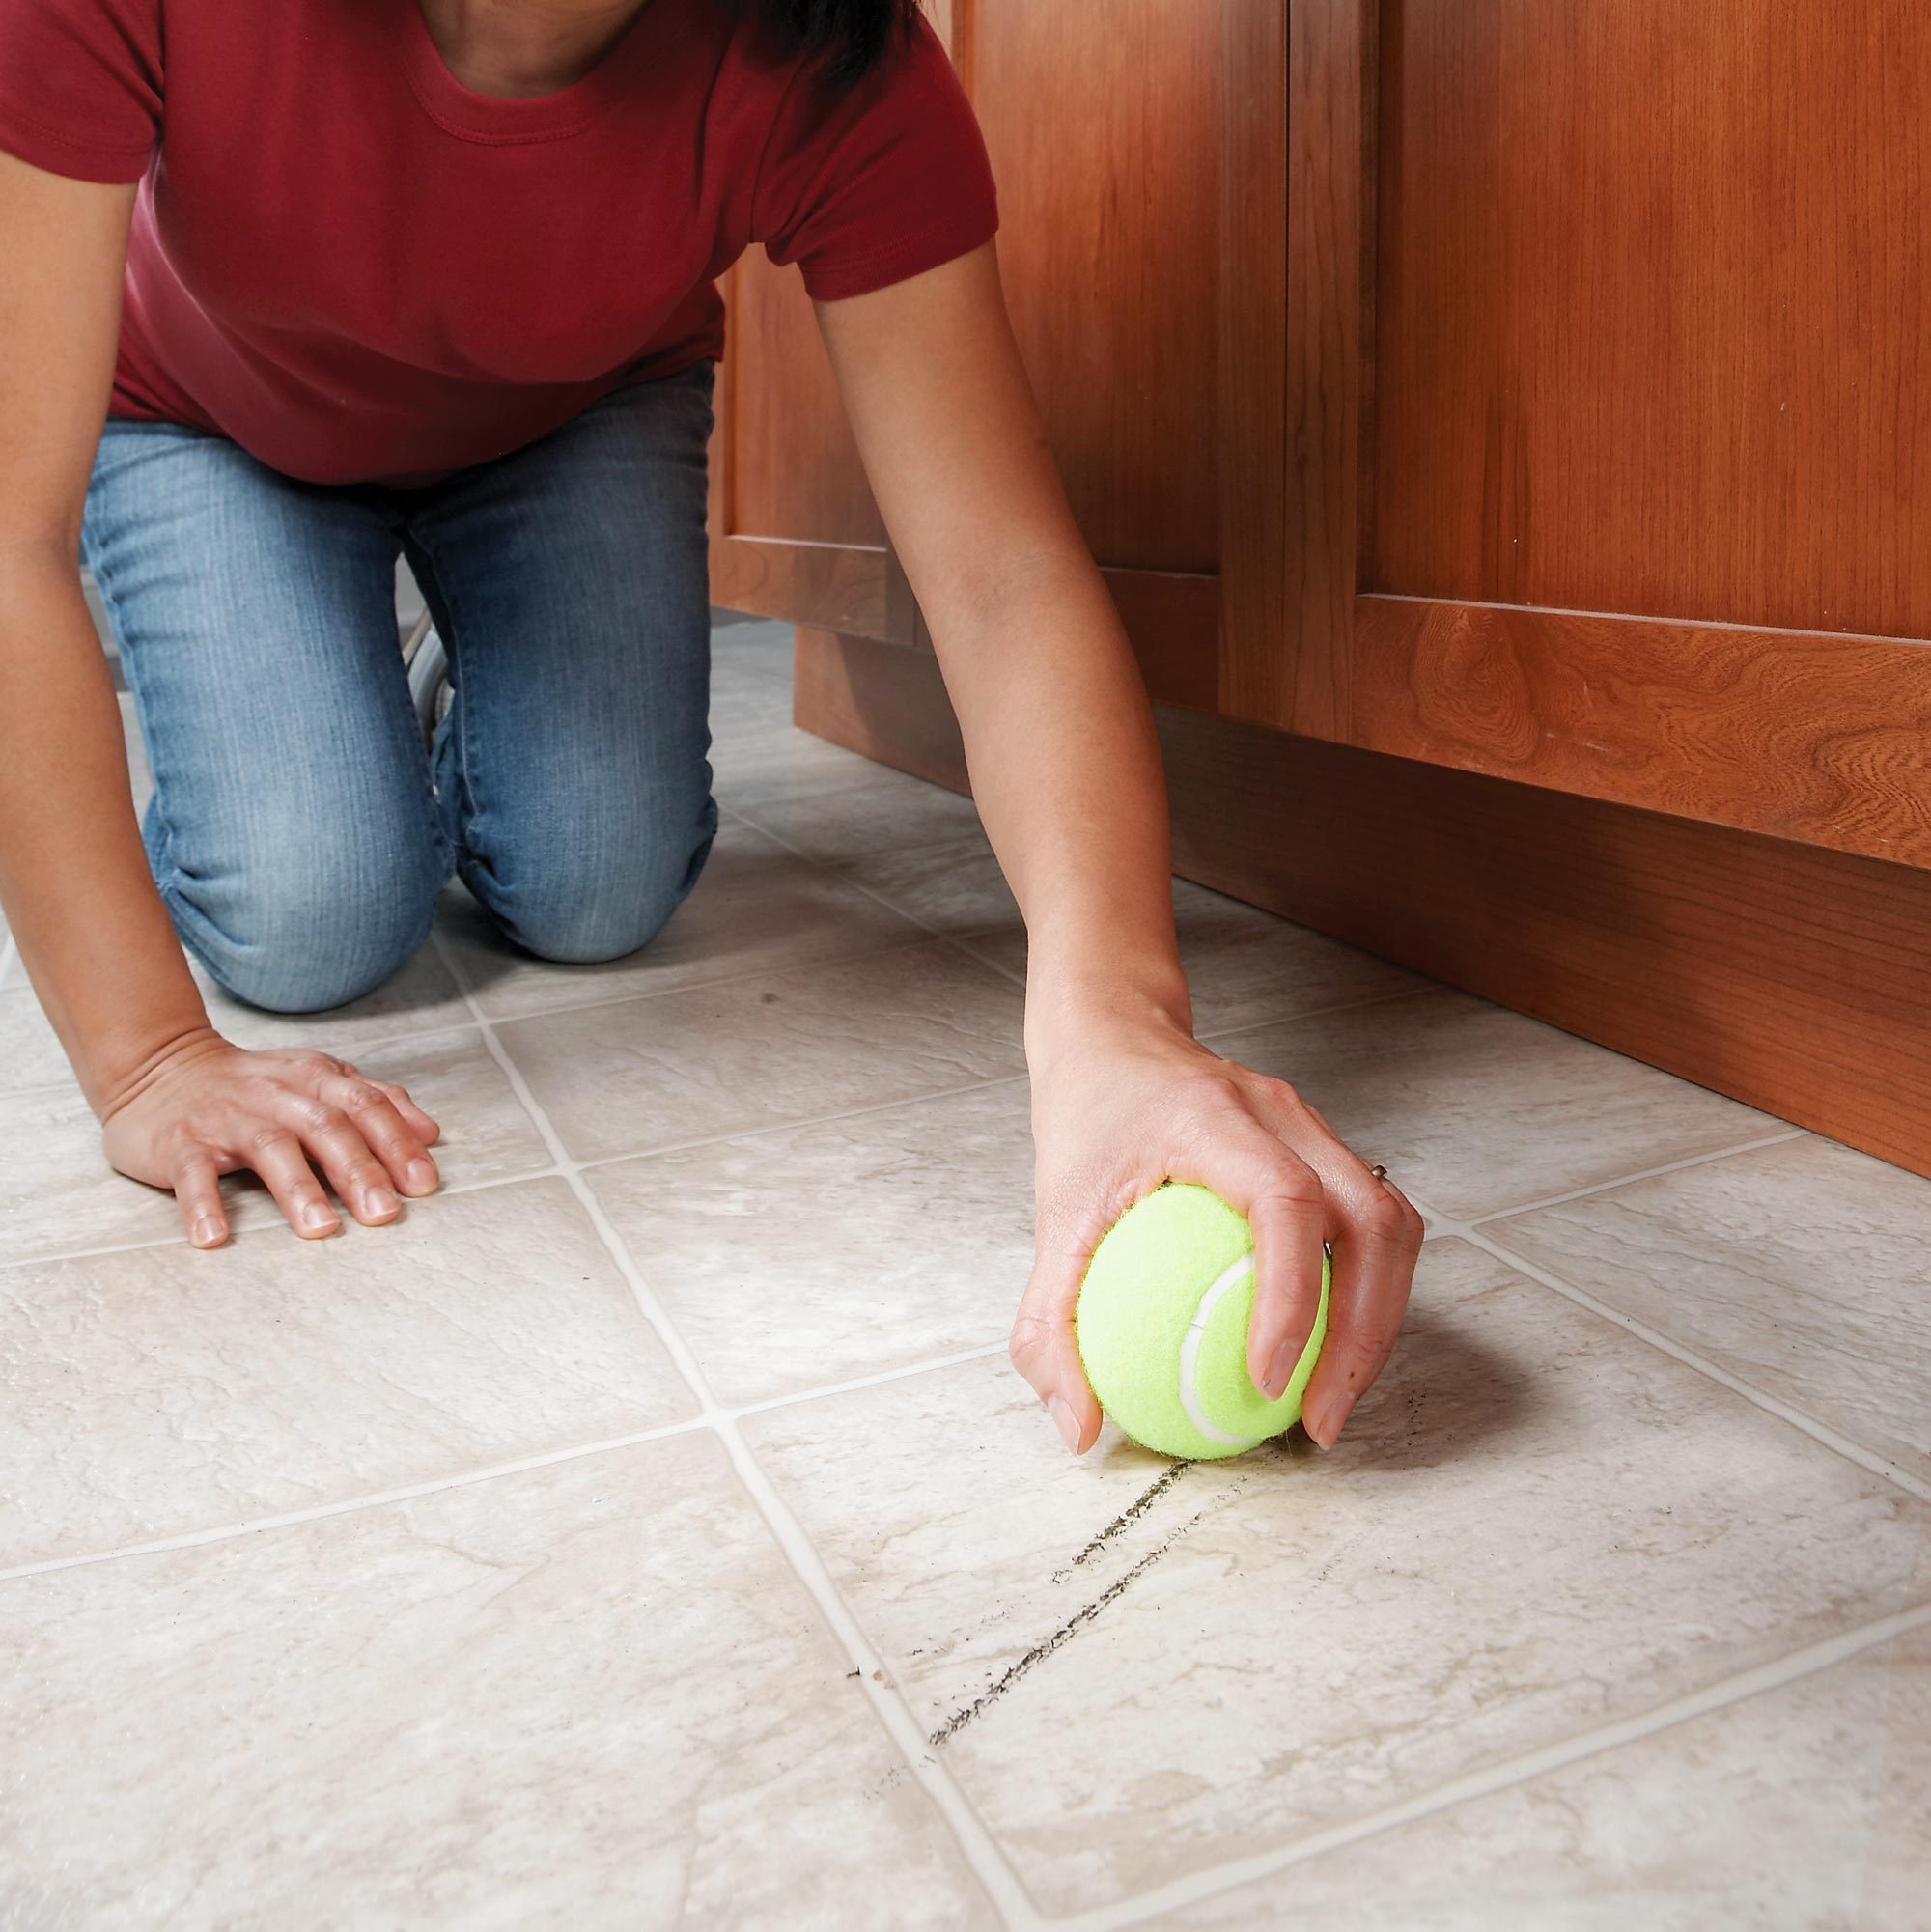 anonymous woman using a Tennis Ball to erase Scuff Marks from the floor